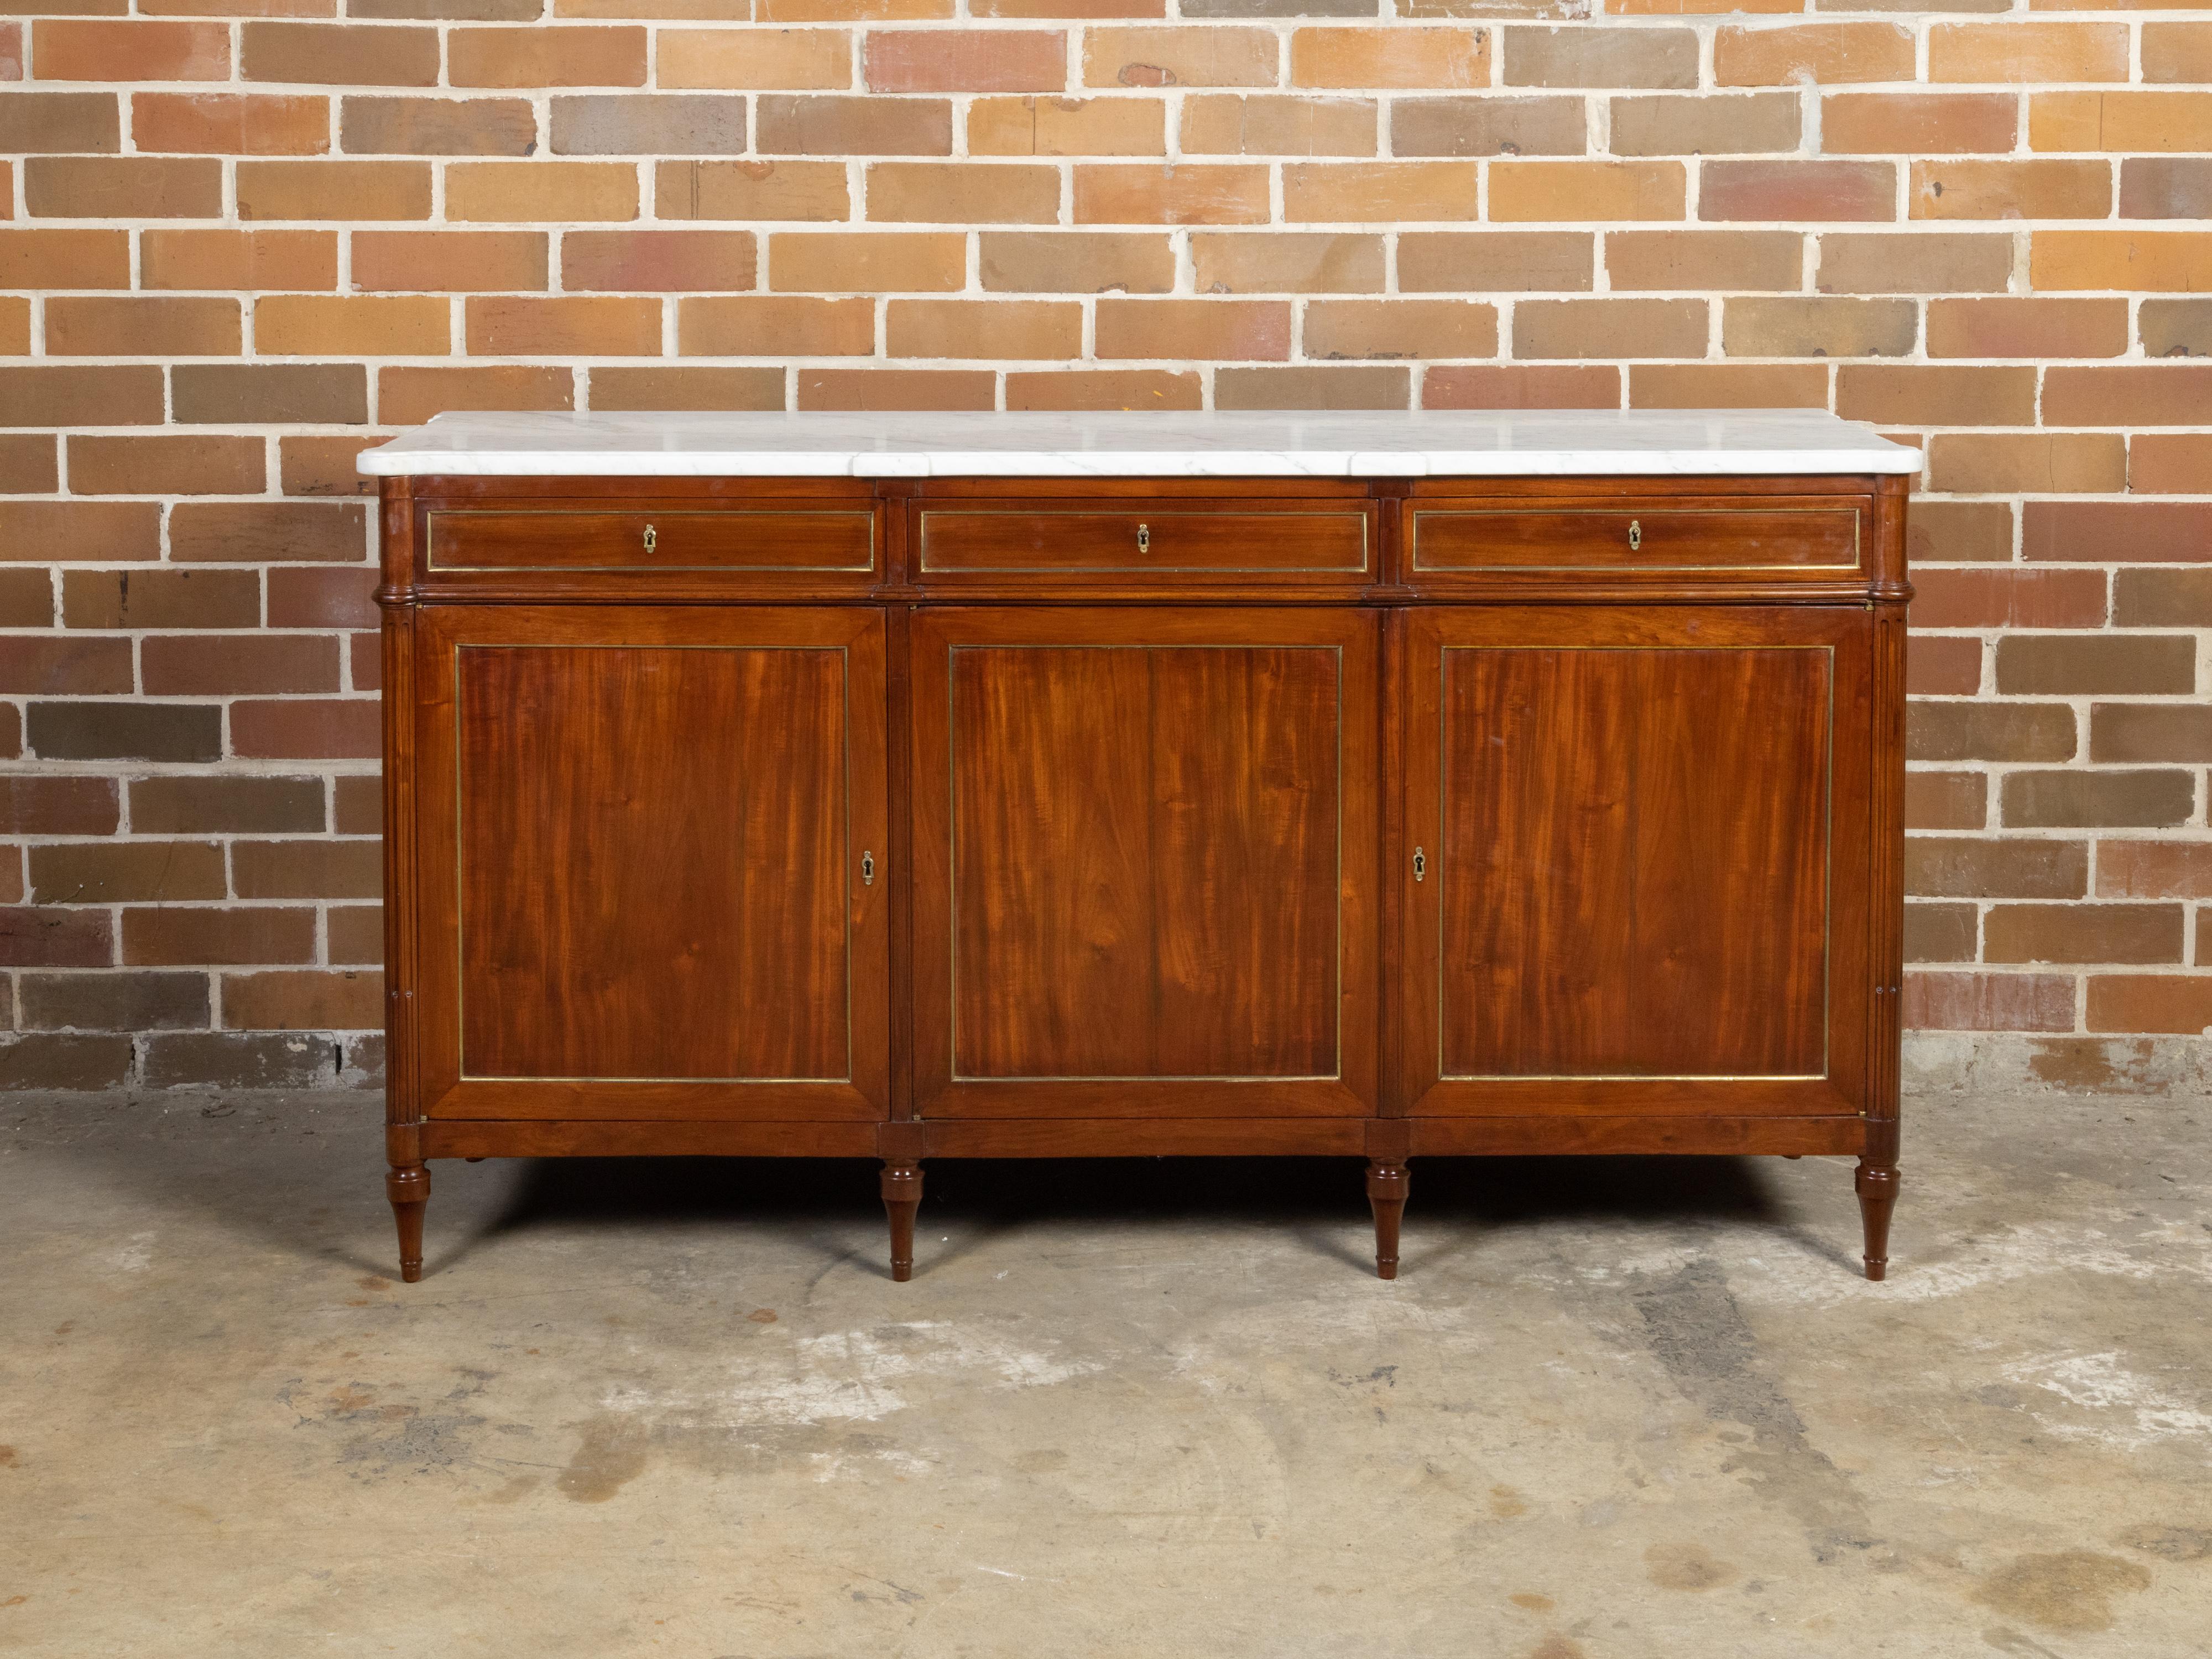 A French walnut sideboard from the 19th century with white marble top and three drawers over three doors. Created in France during the 19th century, this walnut sideboard features a rectangular white marble top with protruding accents and rounded